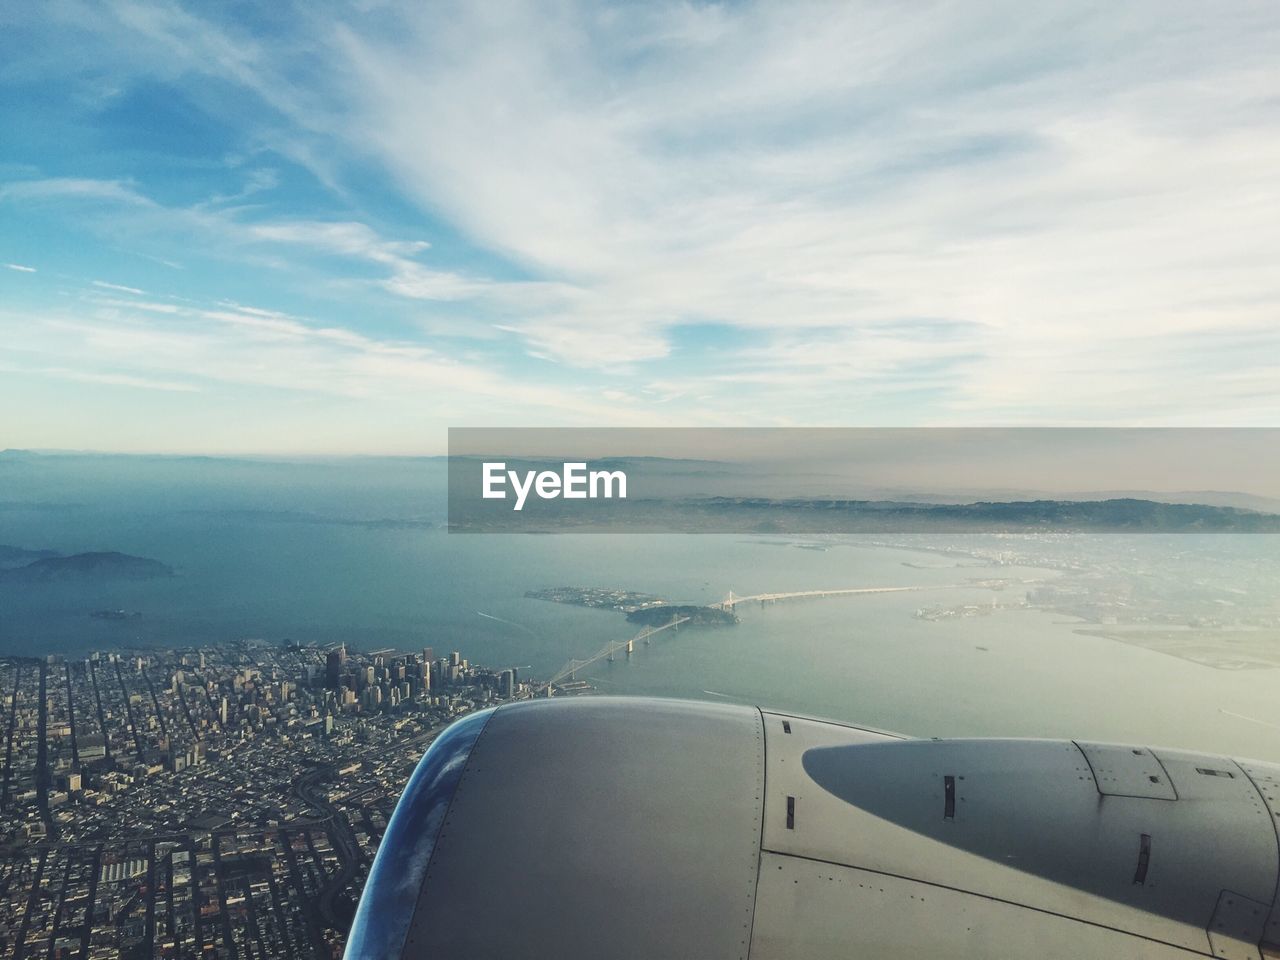 Cropped image of airplane flying over city and sea against sky